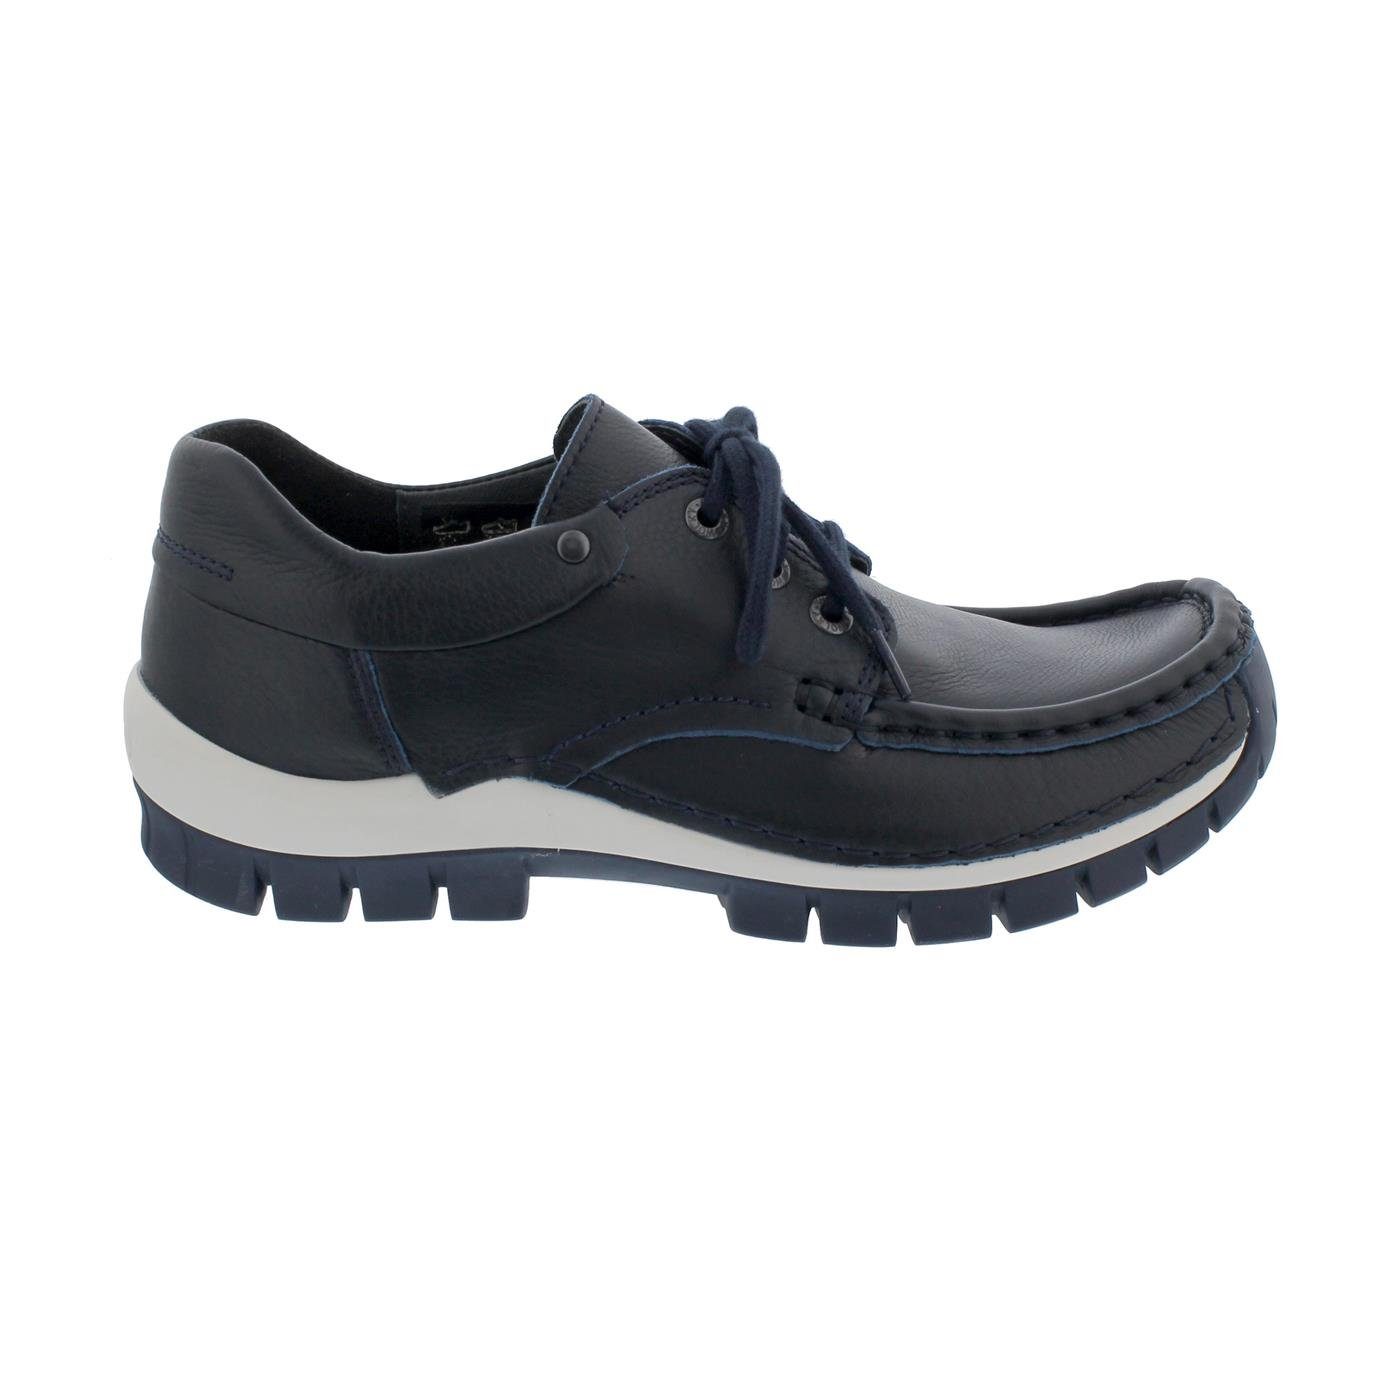 Nappa FLY Blue, Leather, WINTER 0472624-800 Schnürschuh WOLKY Halbschuh,